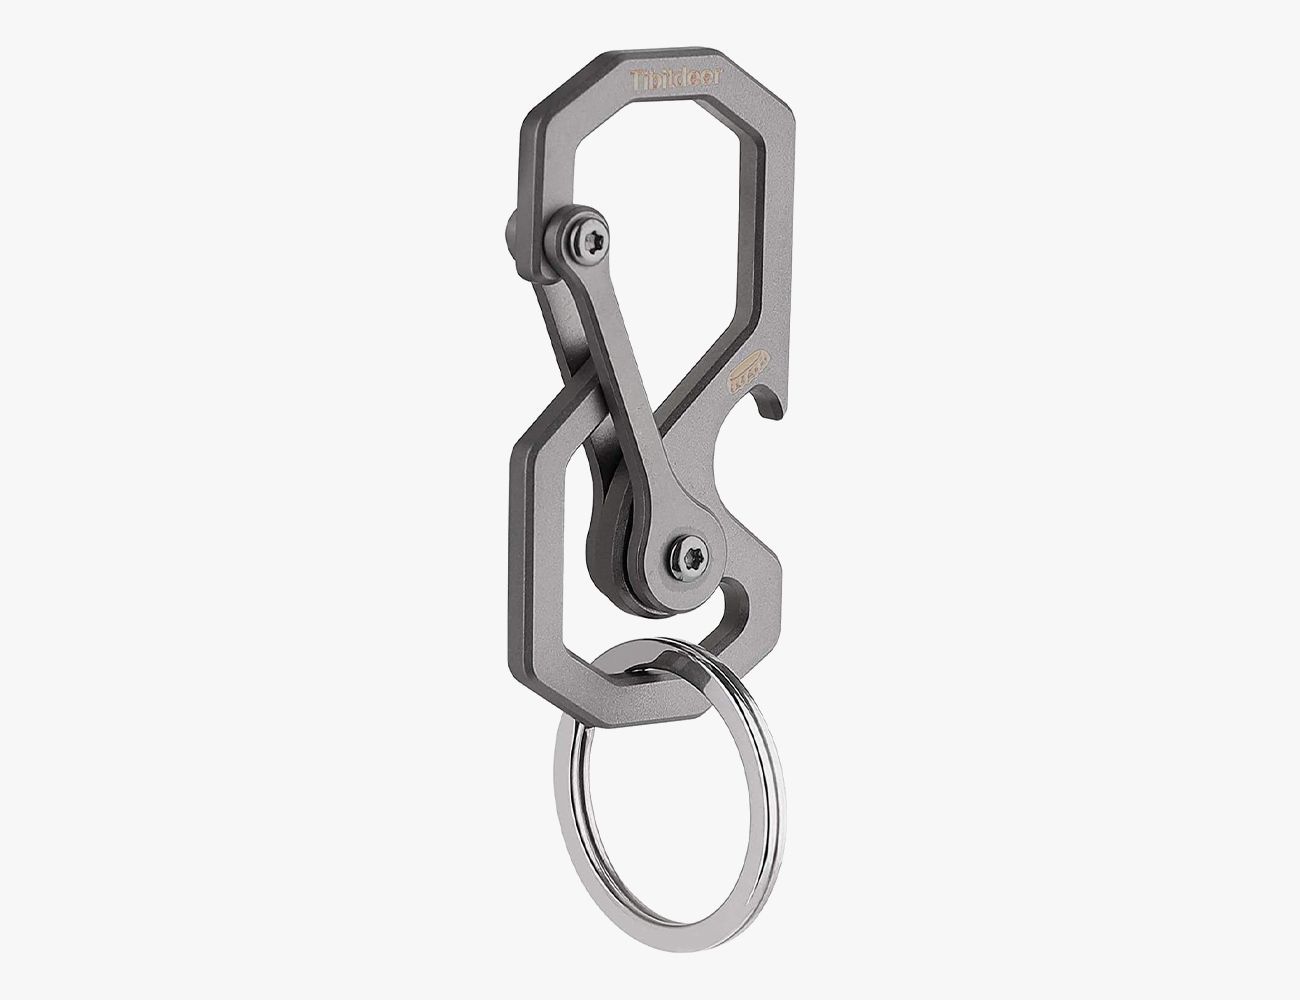 The guide - TOP / Titanium Edc Keychain Bi-Carabiner, with swivel takes  turns.